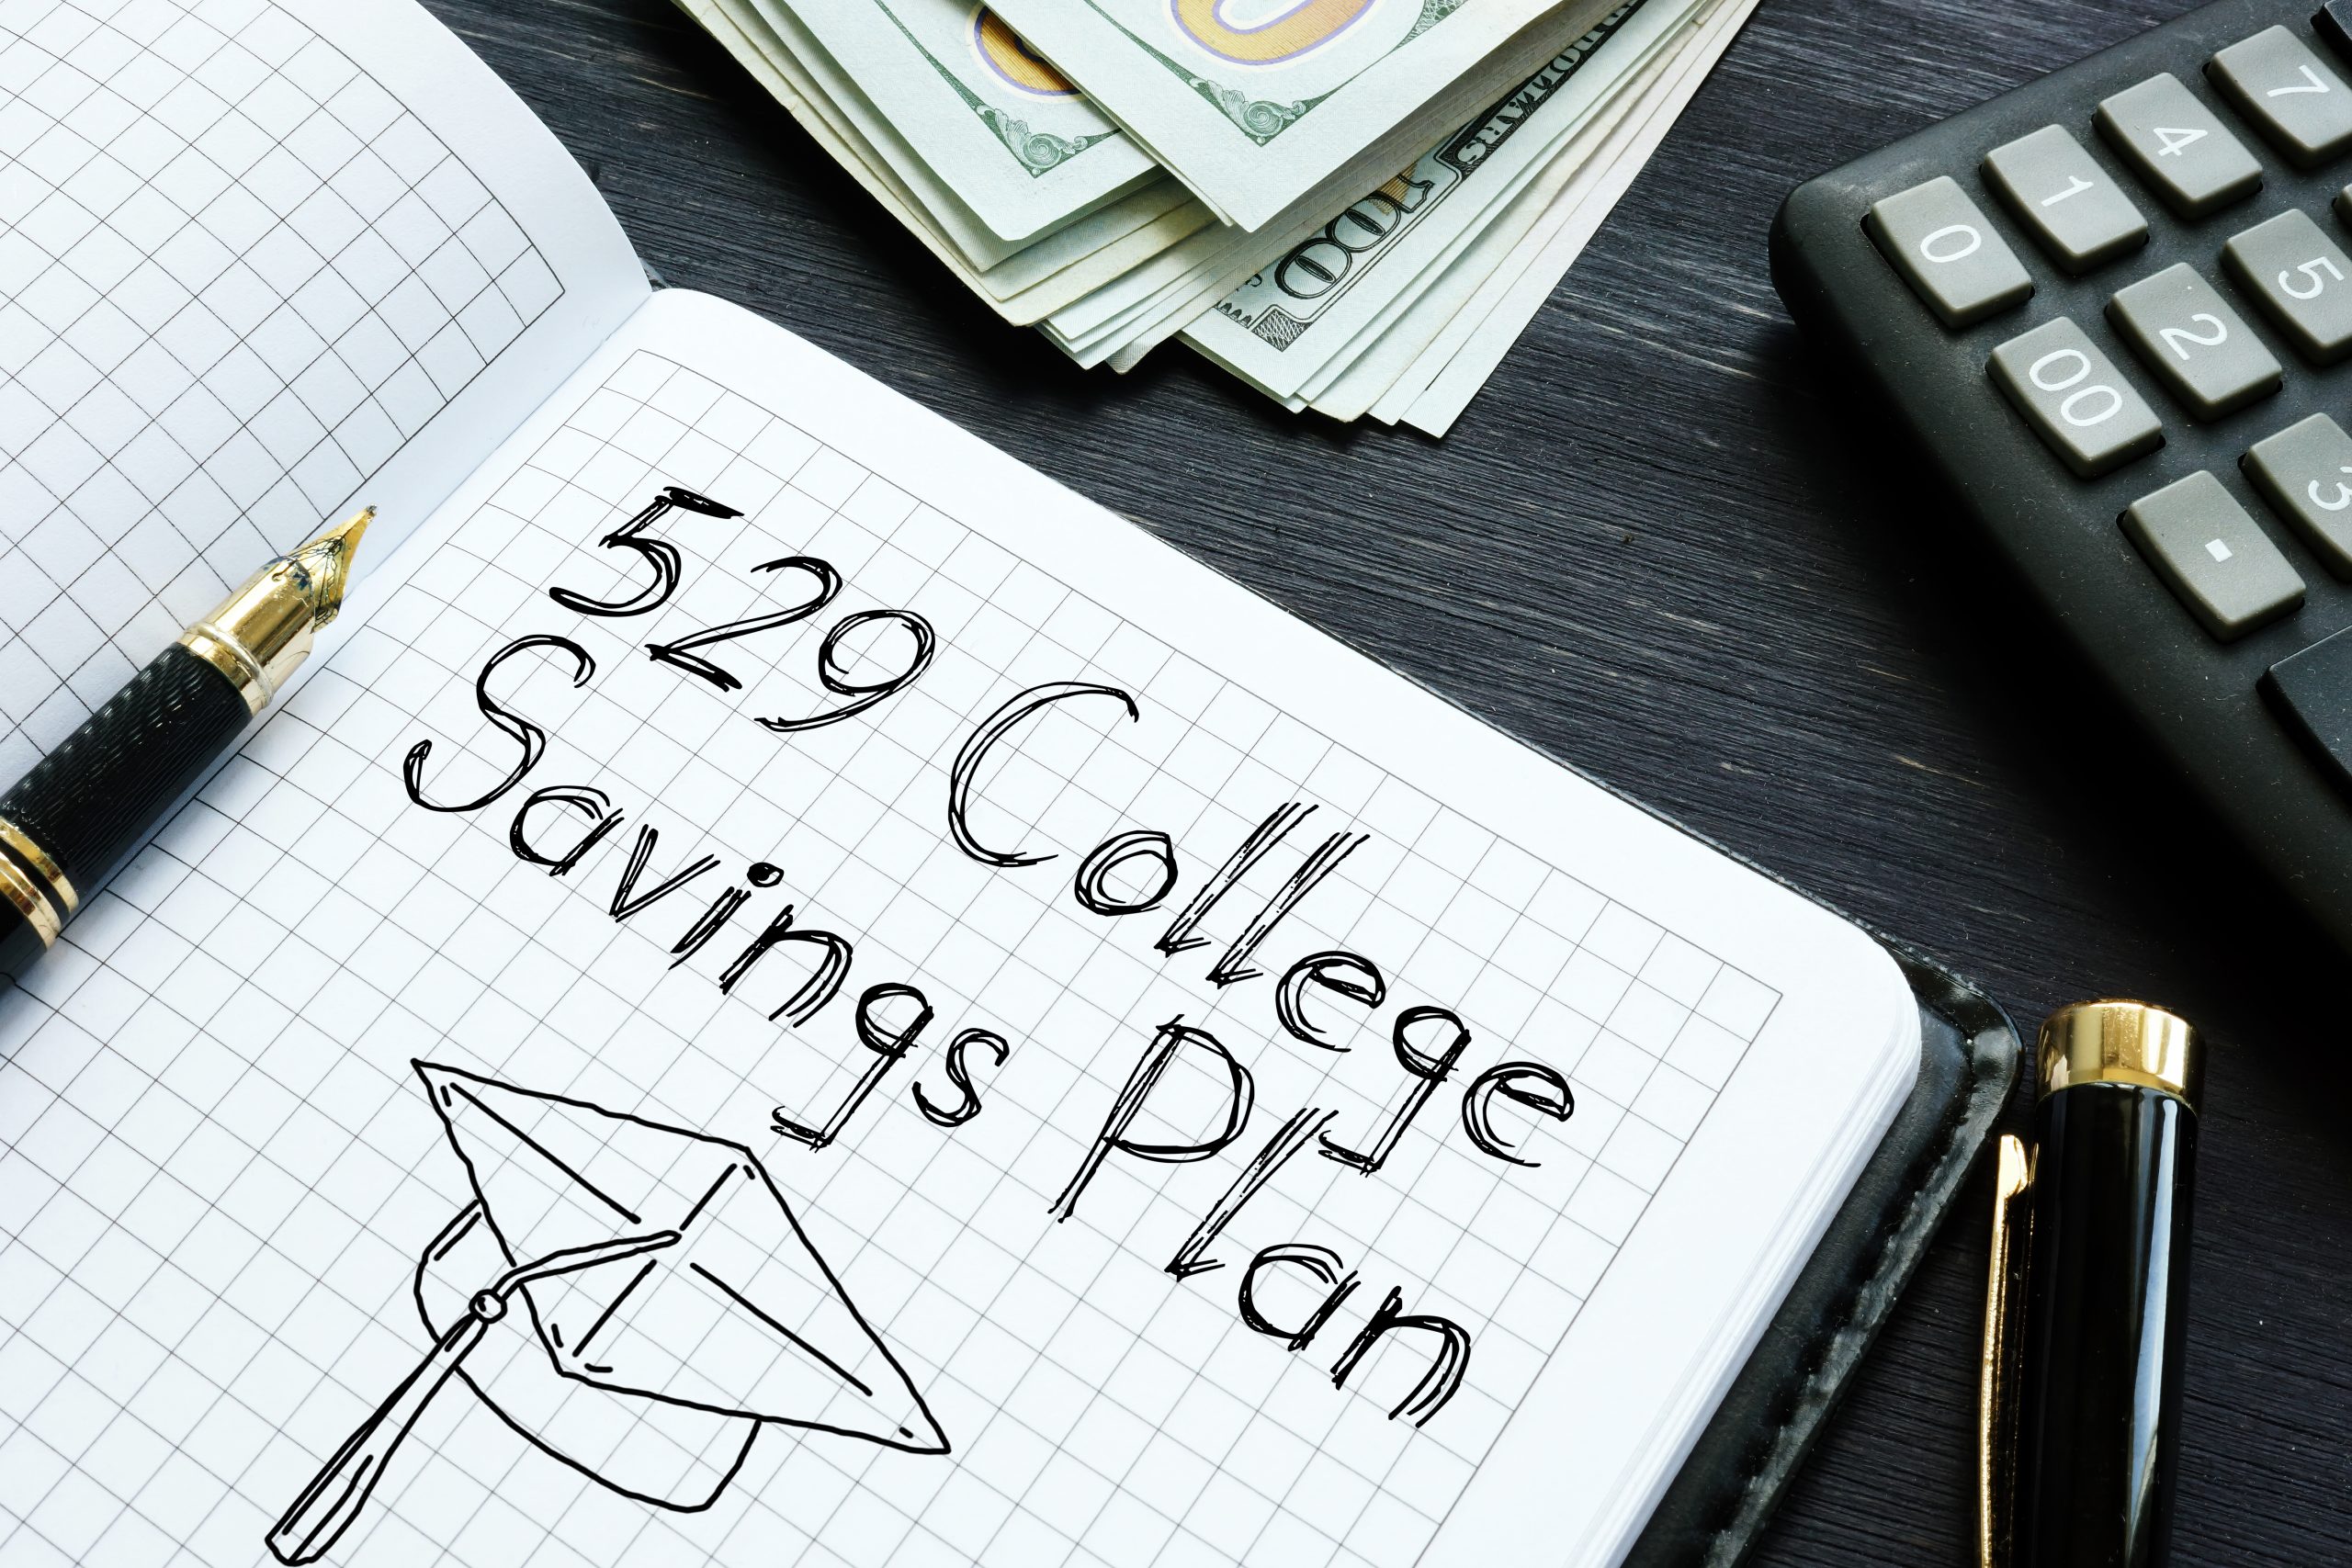 529 College Savings Plan is shown on a conceptual photo using the text